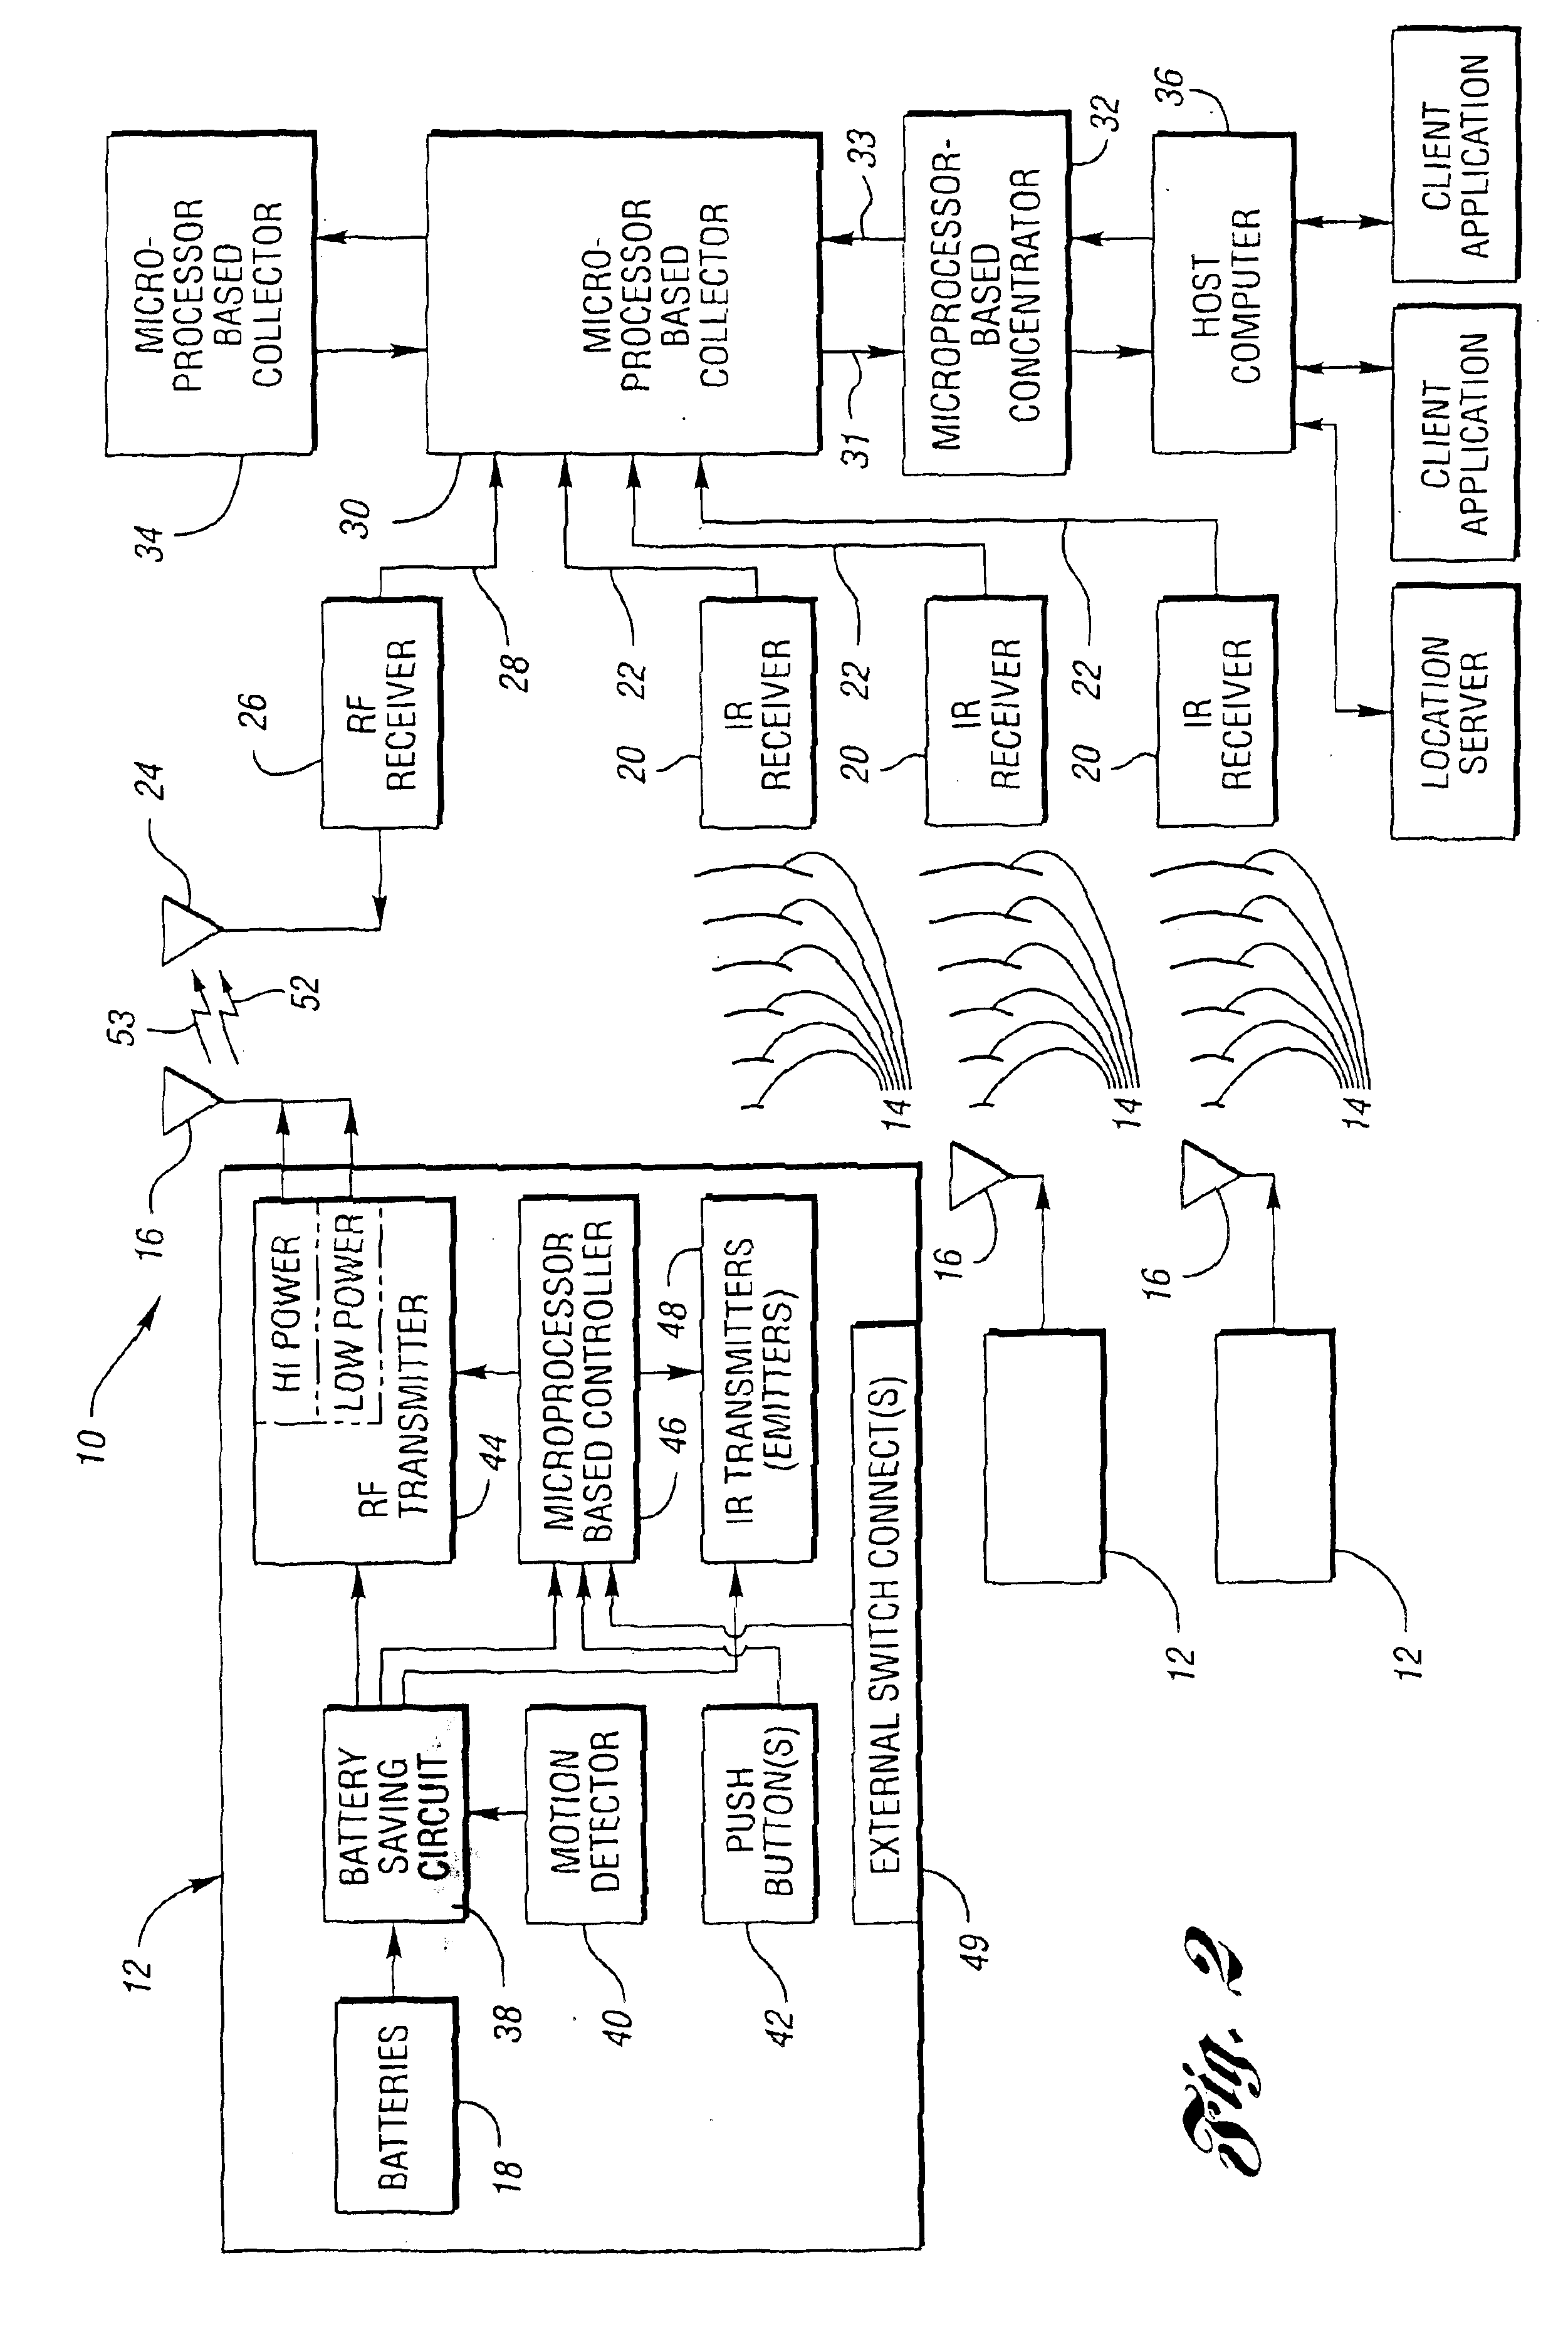 Methods and systems for locating subjects and providing event notification within a tracking environment and badge for use therein